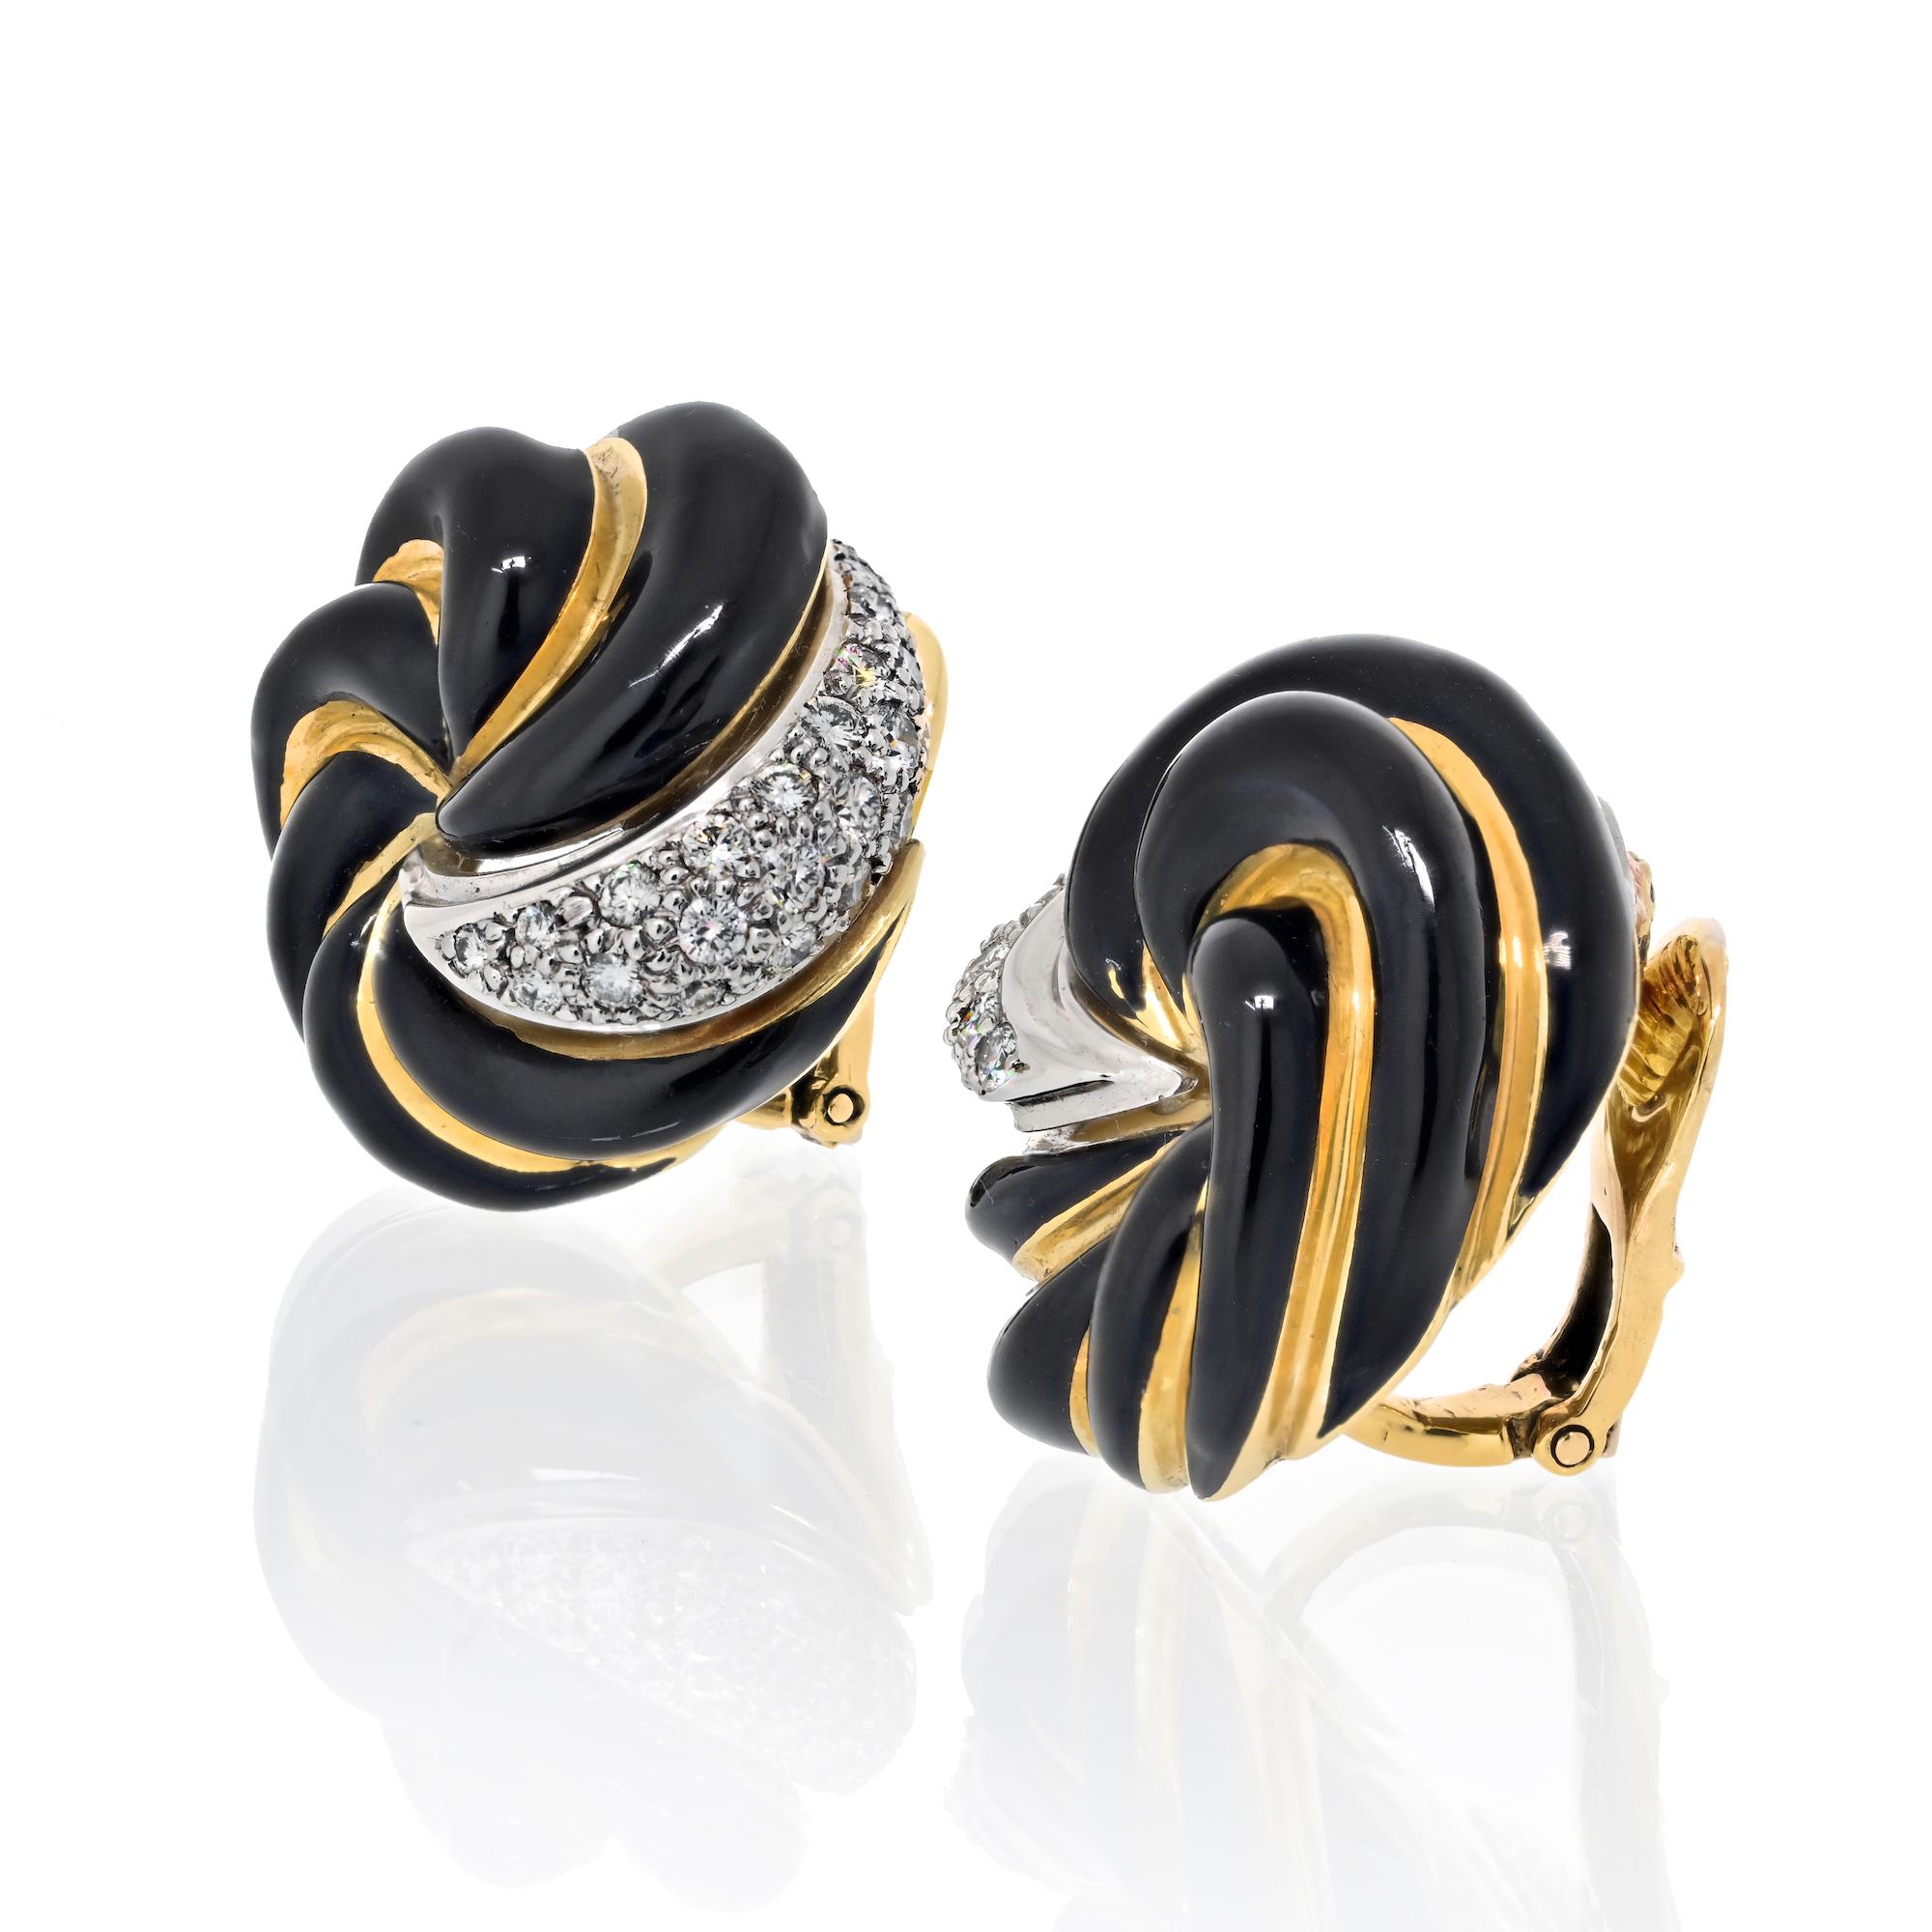 David Webb black enamel and diamond ear -clips in 18k yellow gold and platinum. The earrings feature bombe swirl design alternating gold and black enamel. Each earring accented with one platinum plate encrusted with 54 round brilliant cut diamonds